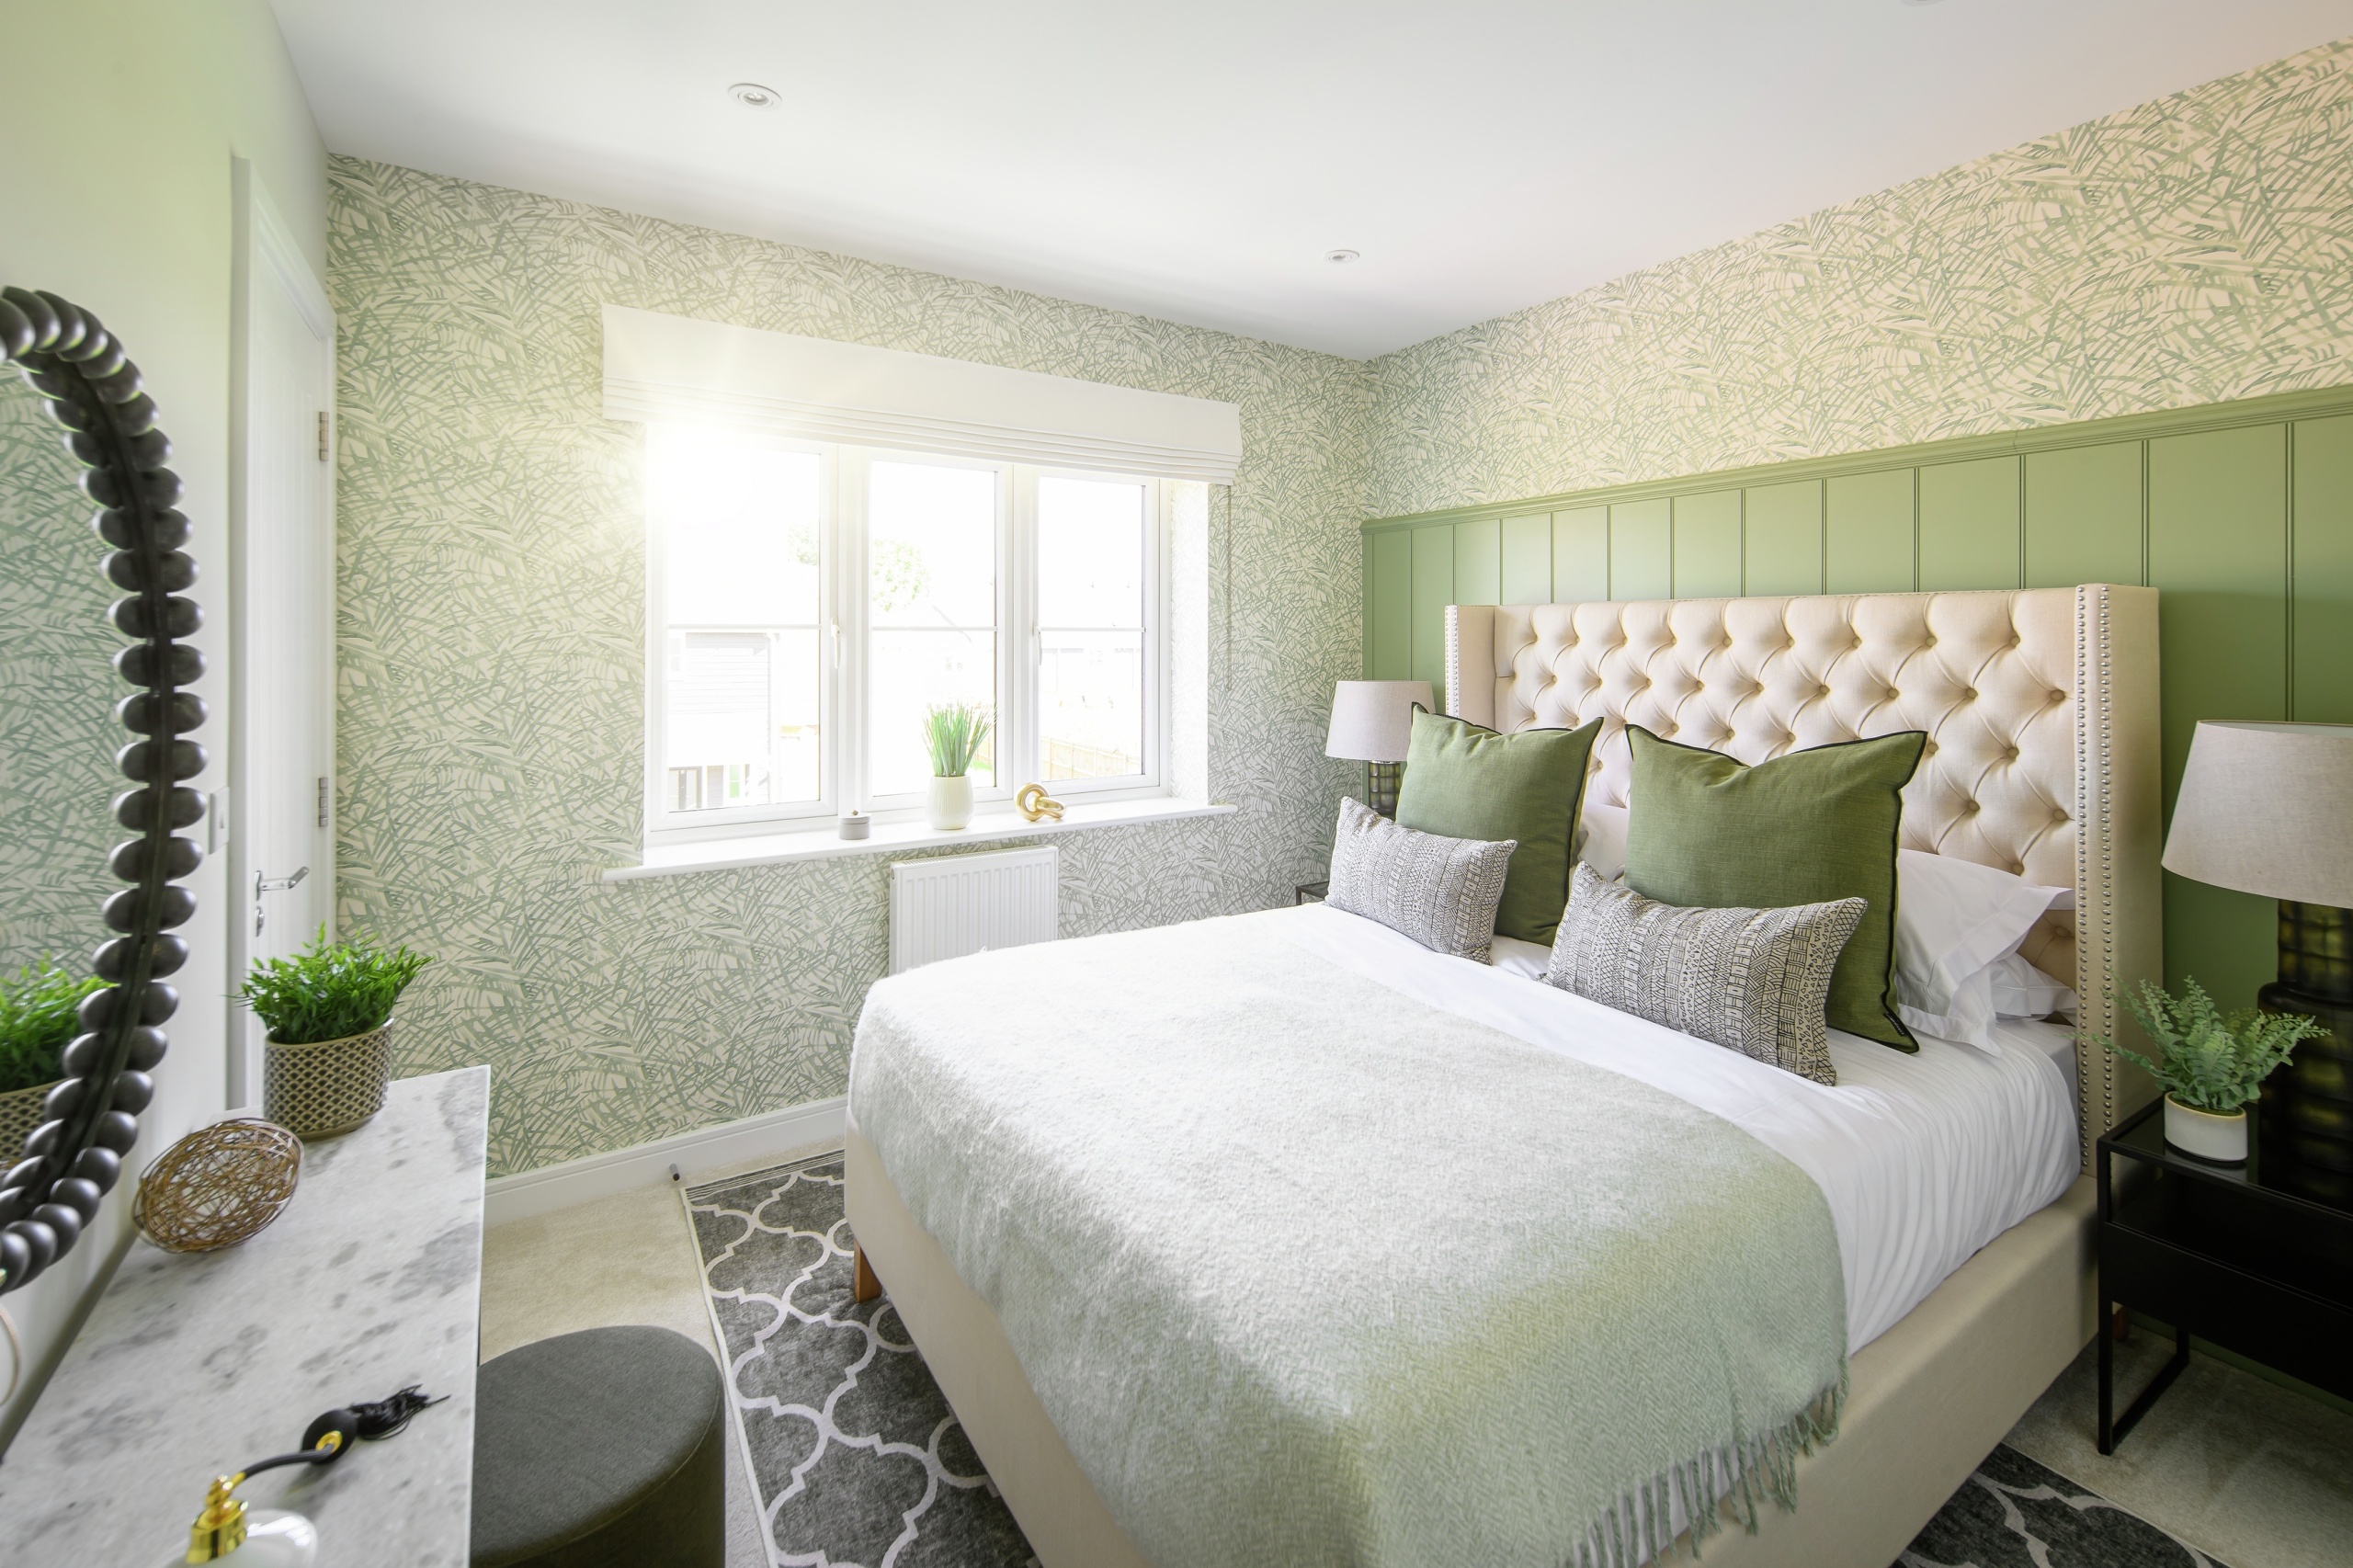 A white and green bedroom with a large double bed in the centre